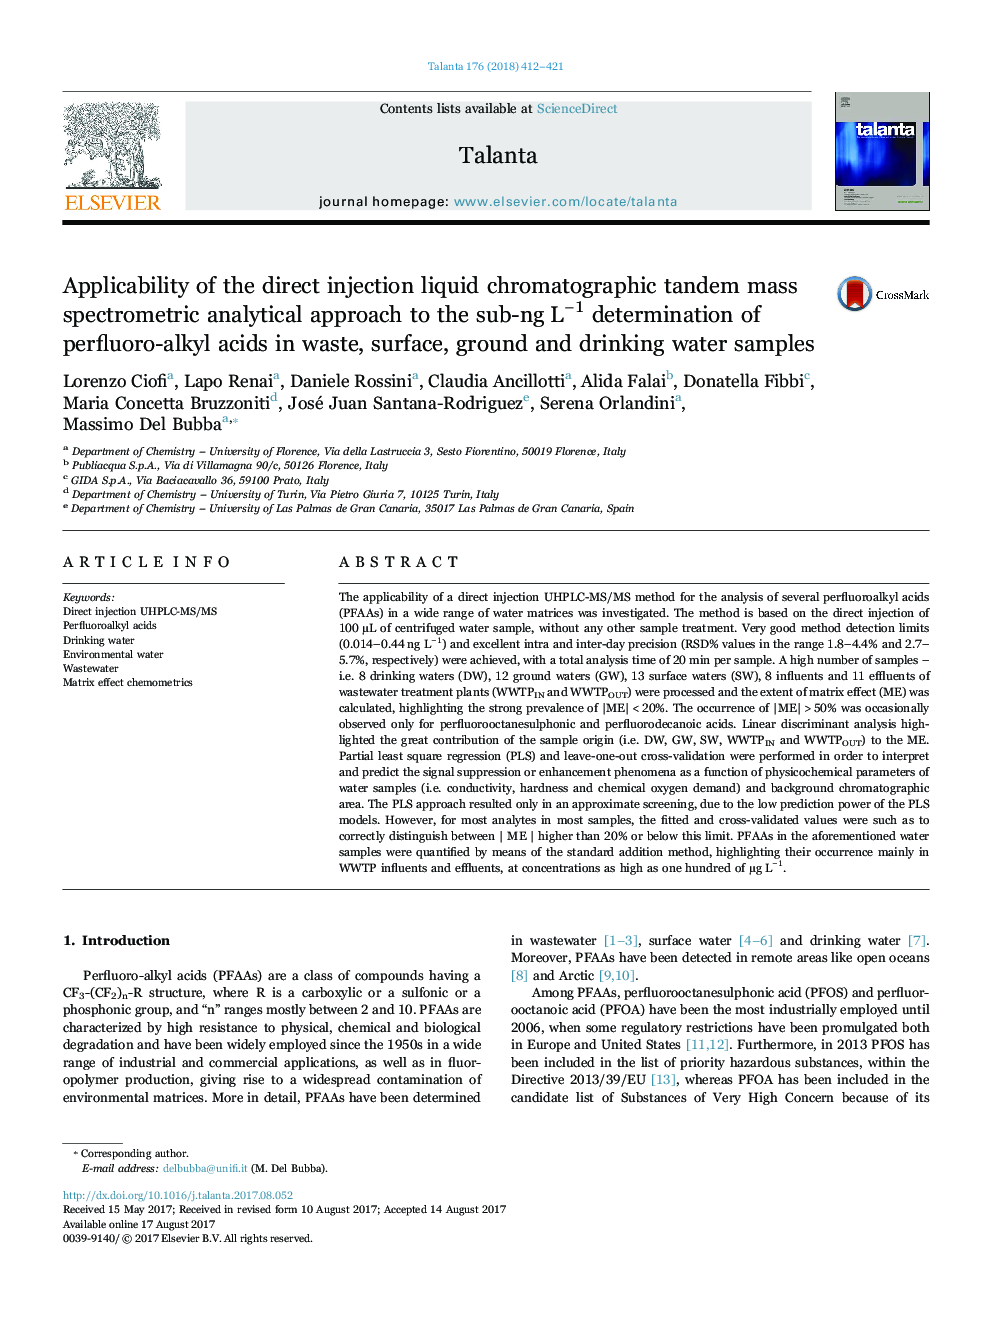 Applicability of the direct injection liquid chromatographic tandem mass spectrometric analytical approach to the sub-ngÂ Lâ1 determination of perfluoro-alkyl acids in waste, surface, ground and drinking water samples